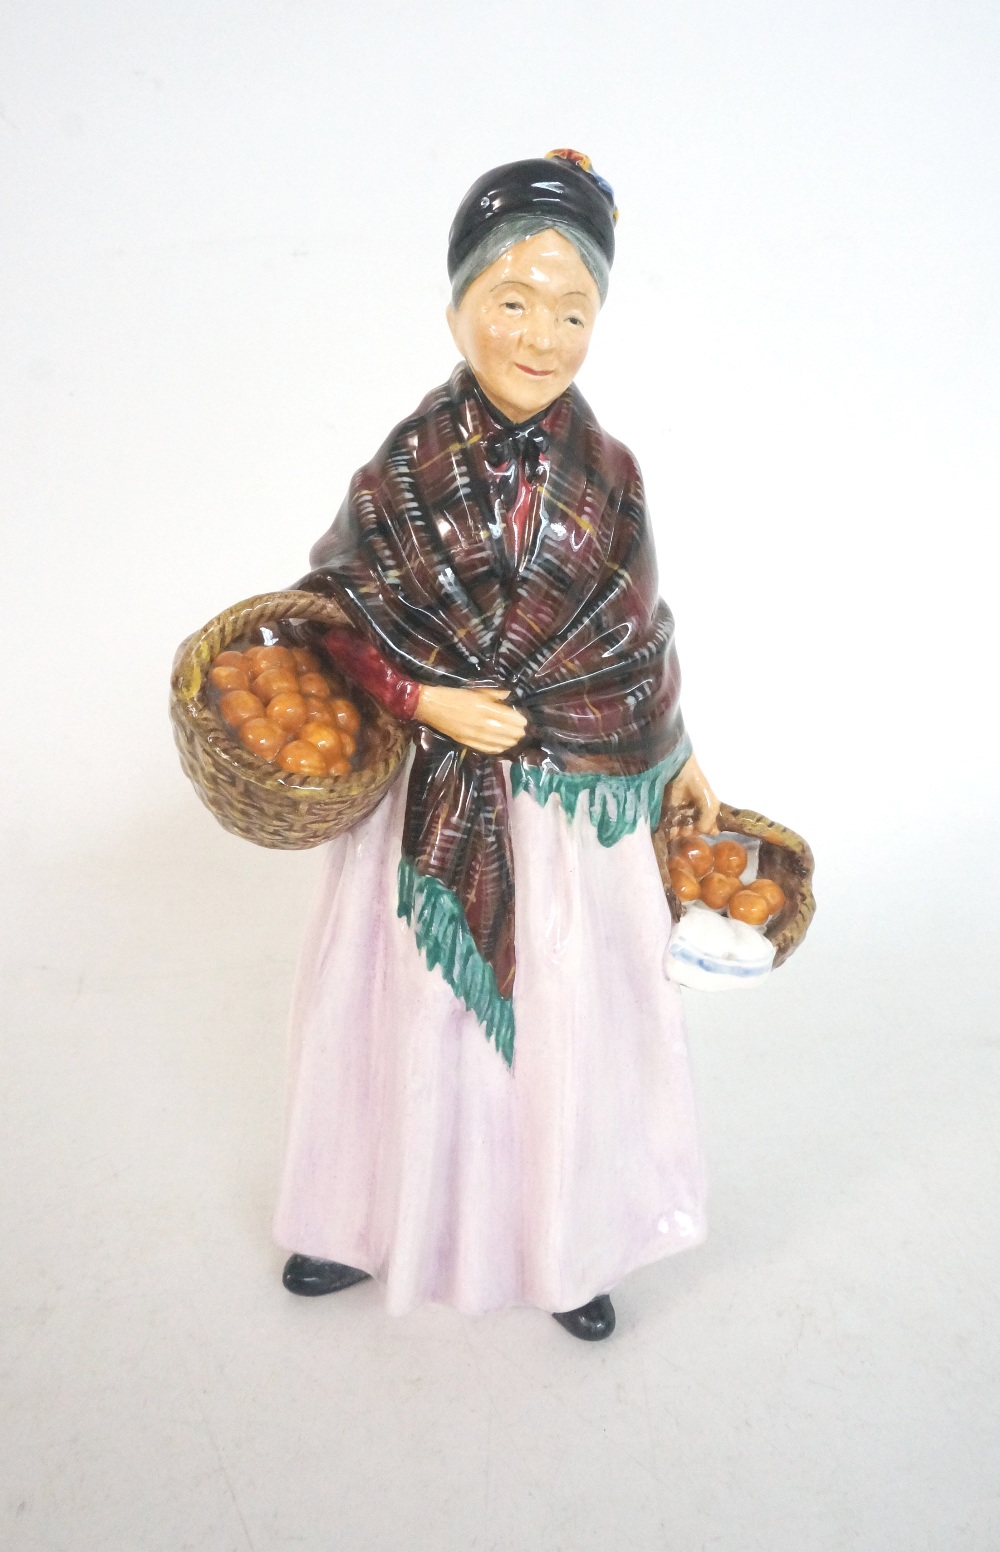 ROYAL DOULTON FIGURINE OF THE ORANGE LADY
HN1759, the lady with a shawl and carrying two baskets